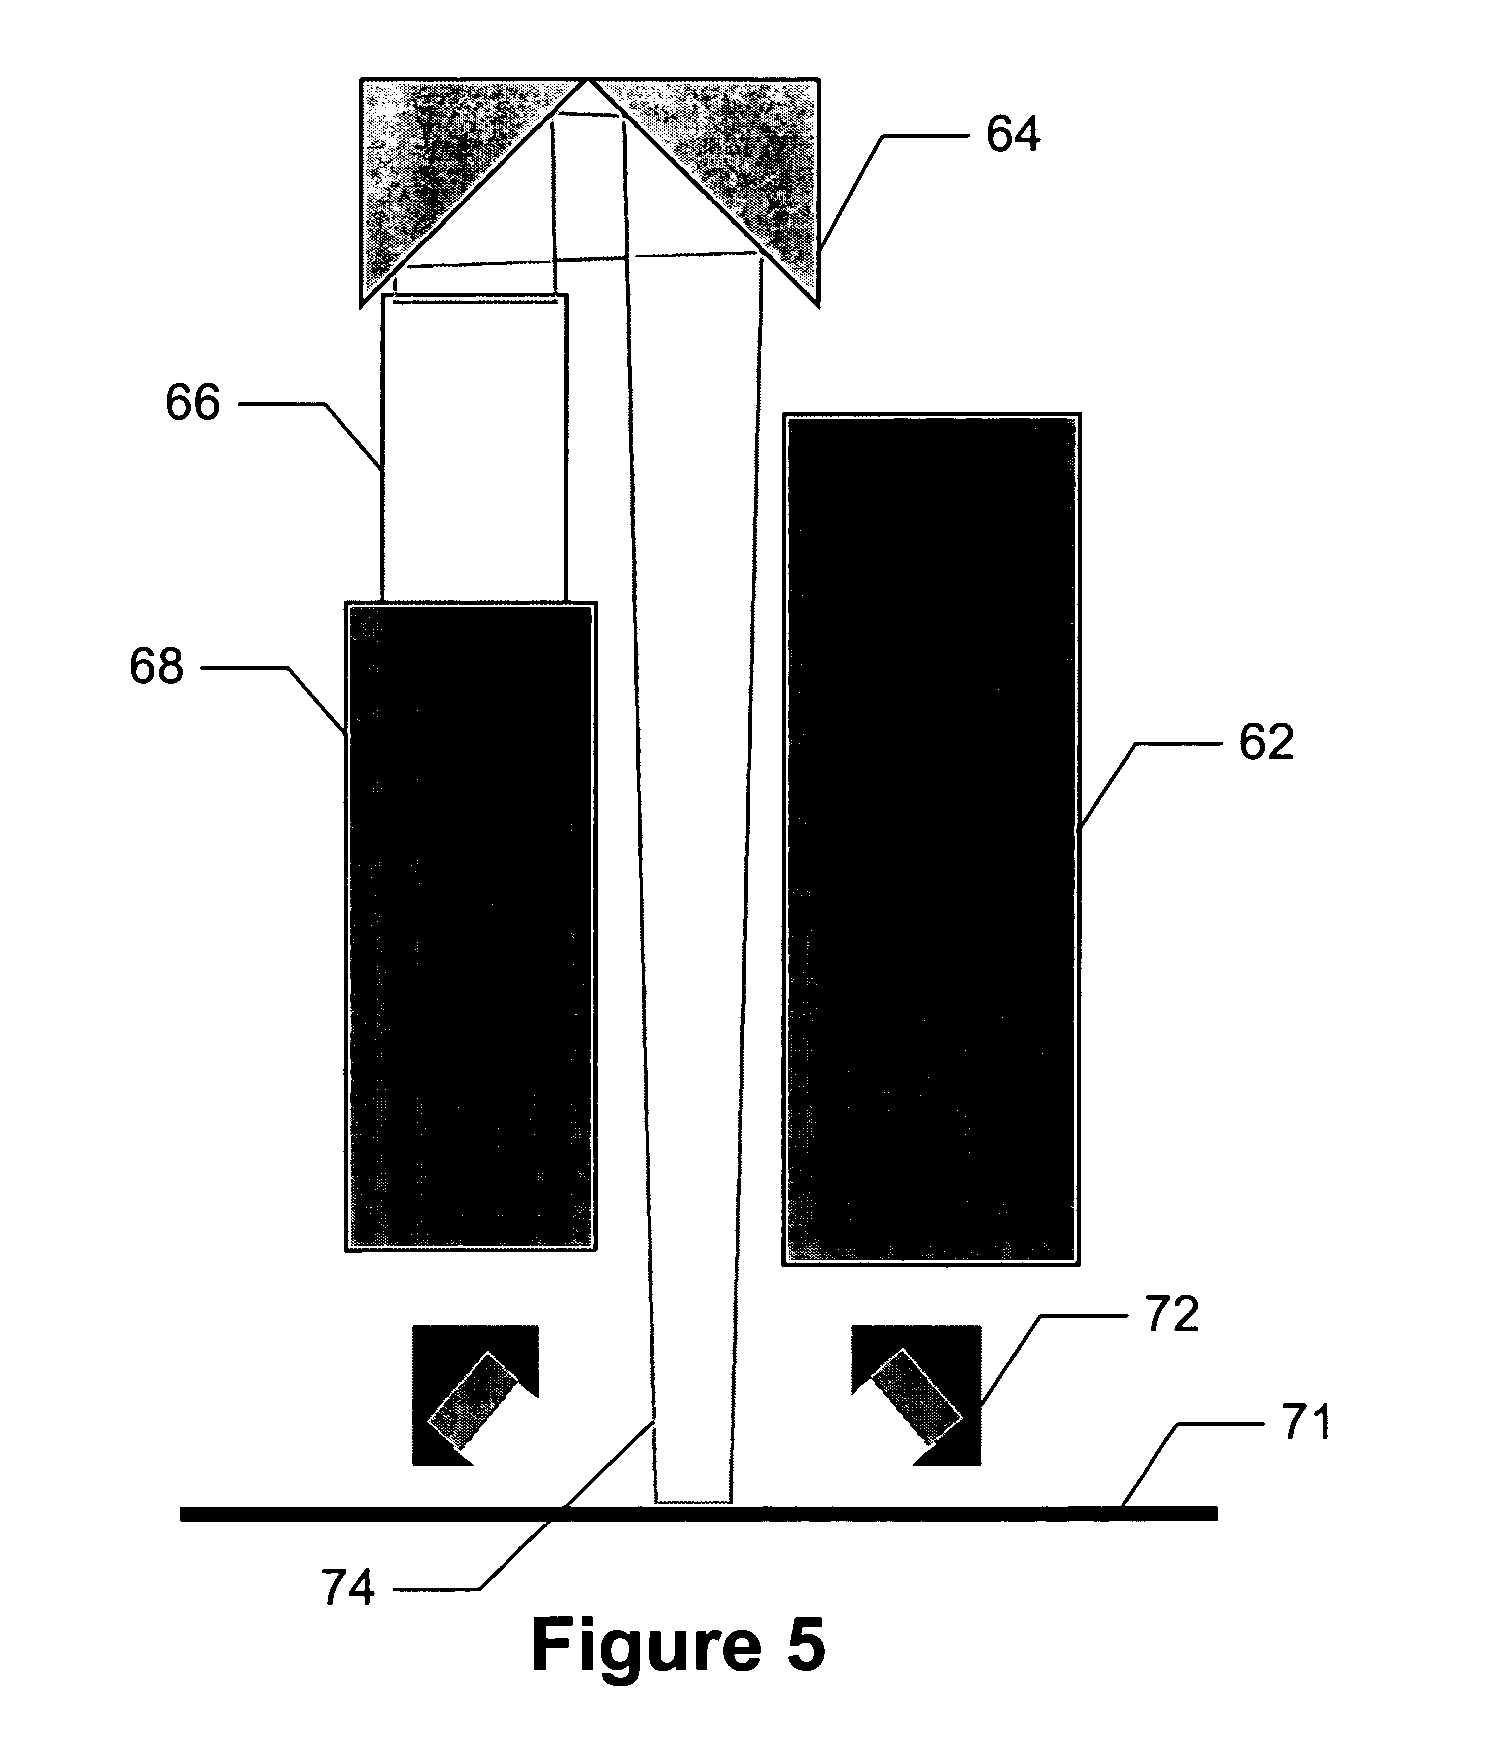 Method and apparatus for measuring fiber orientation of a moving web